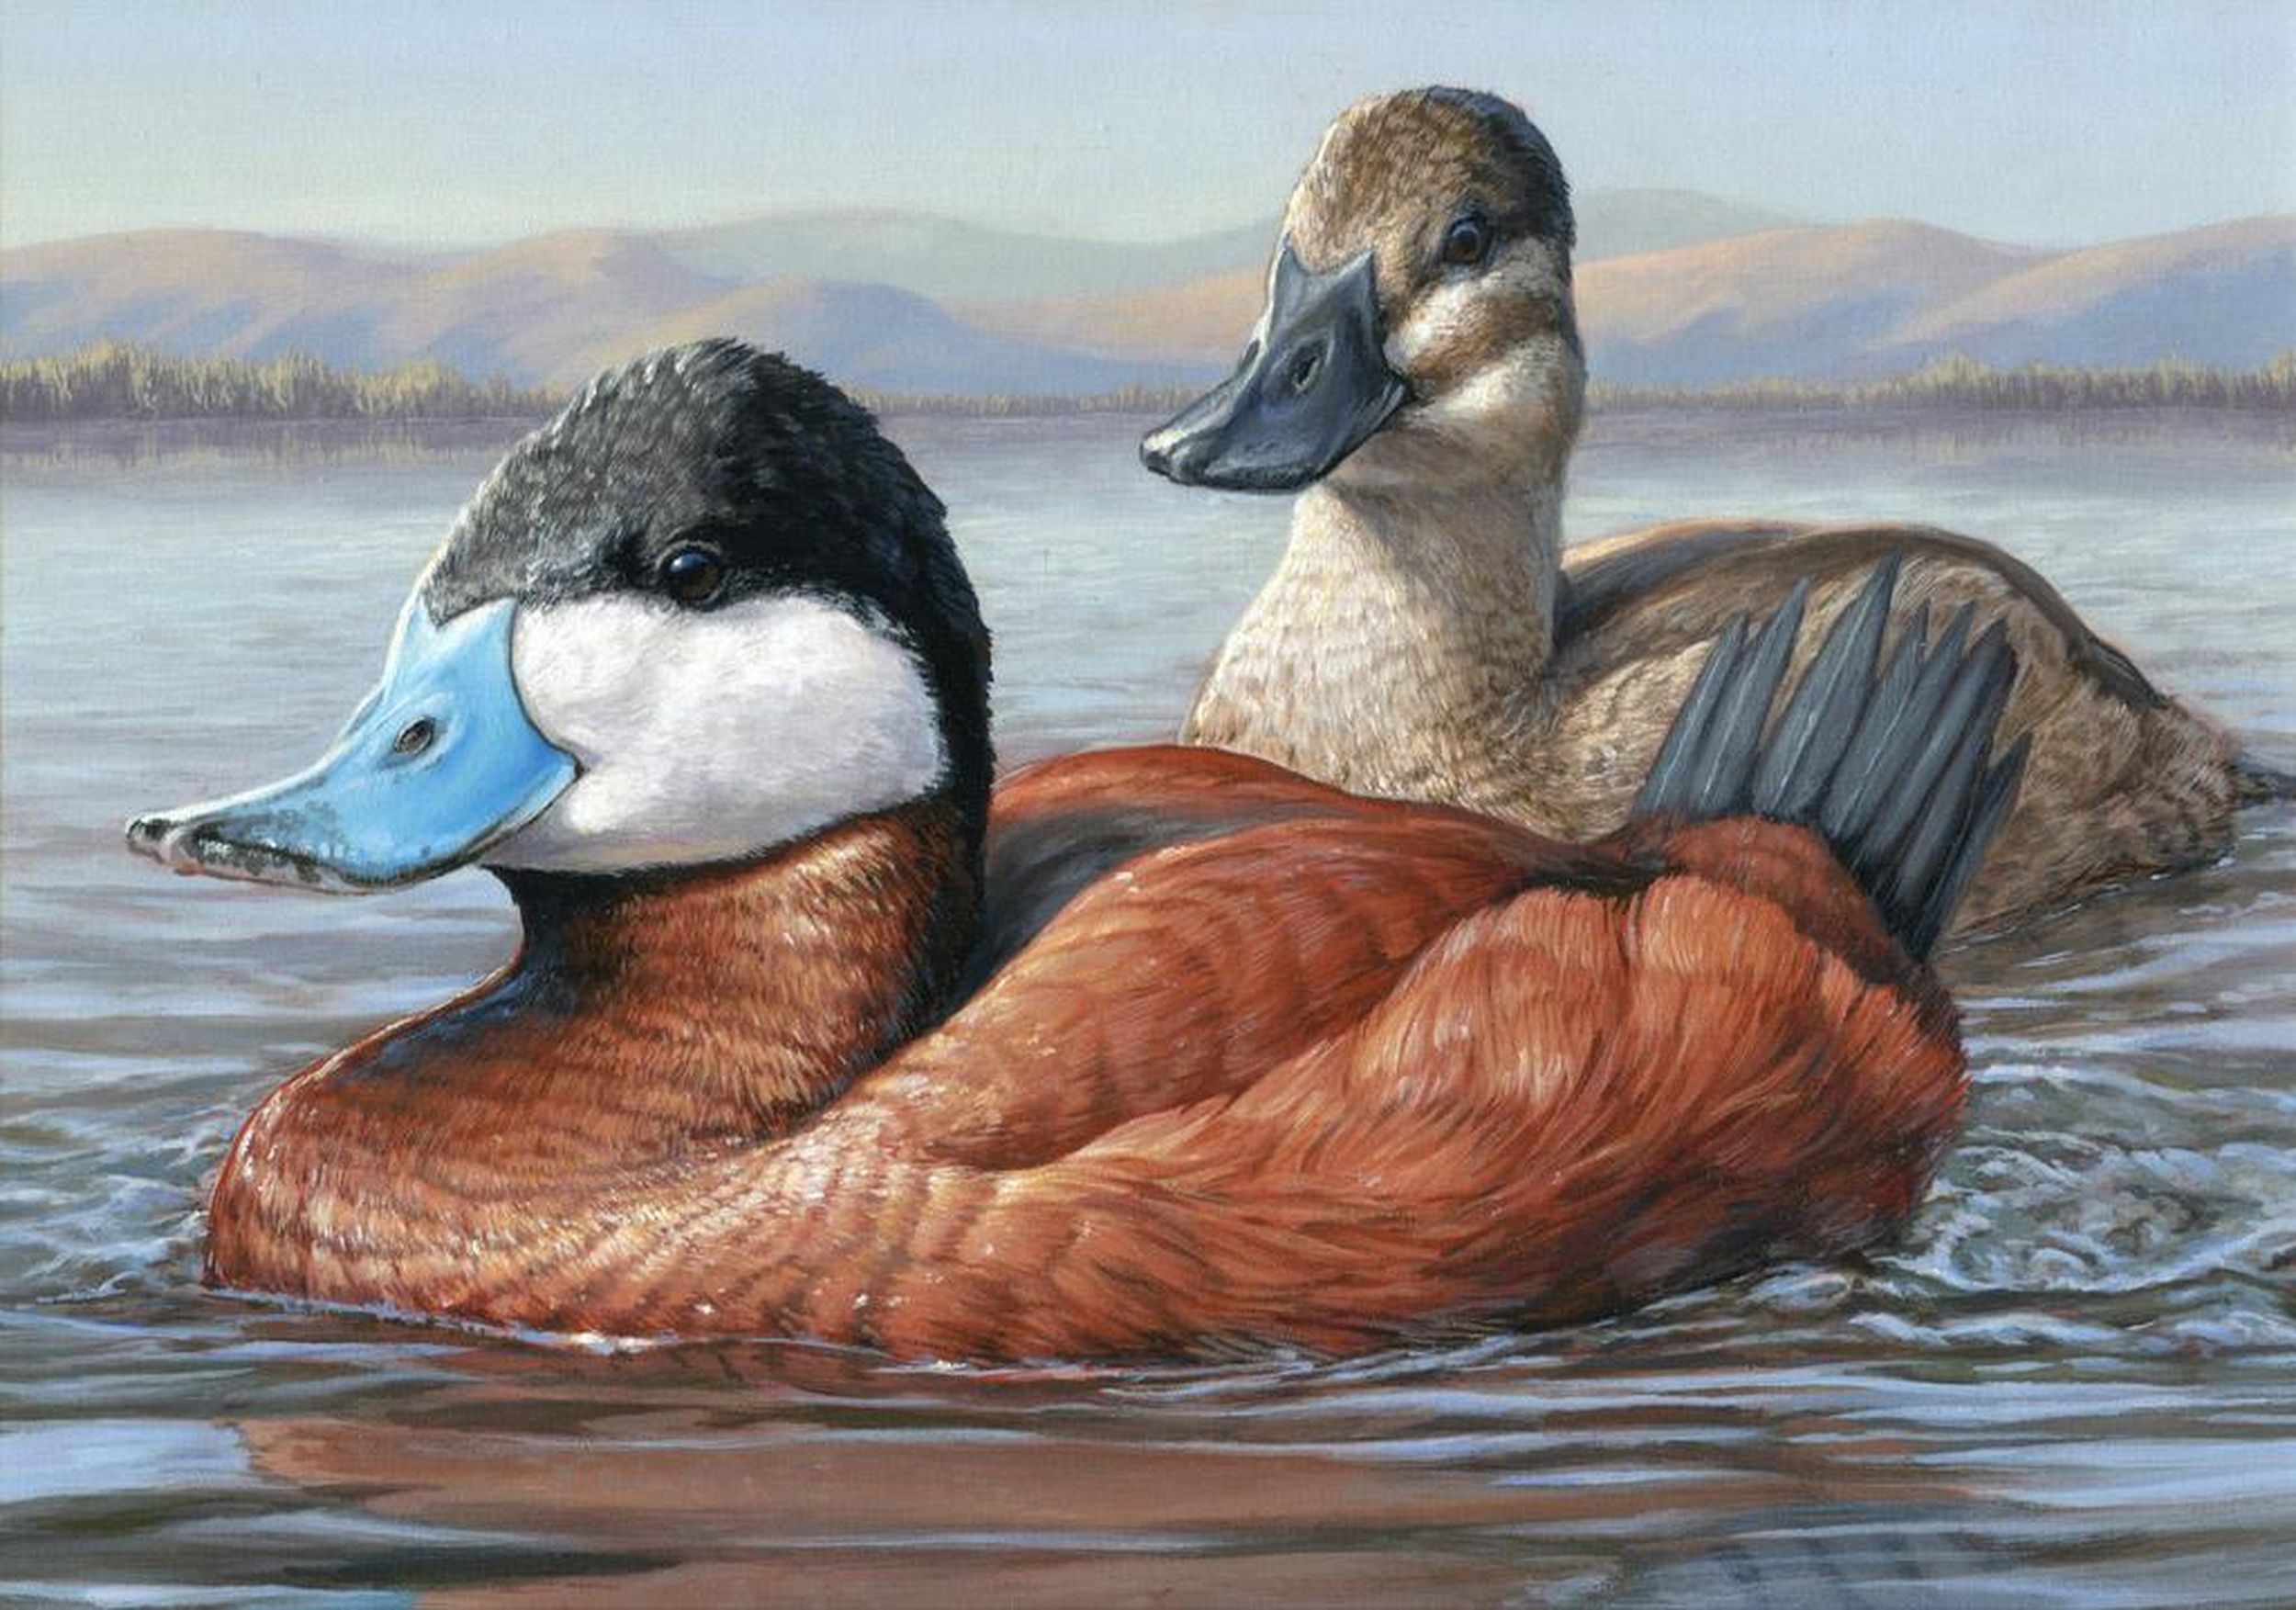 Hunters didn’t flinch at 67 percent increase in duck stamp price The